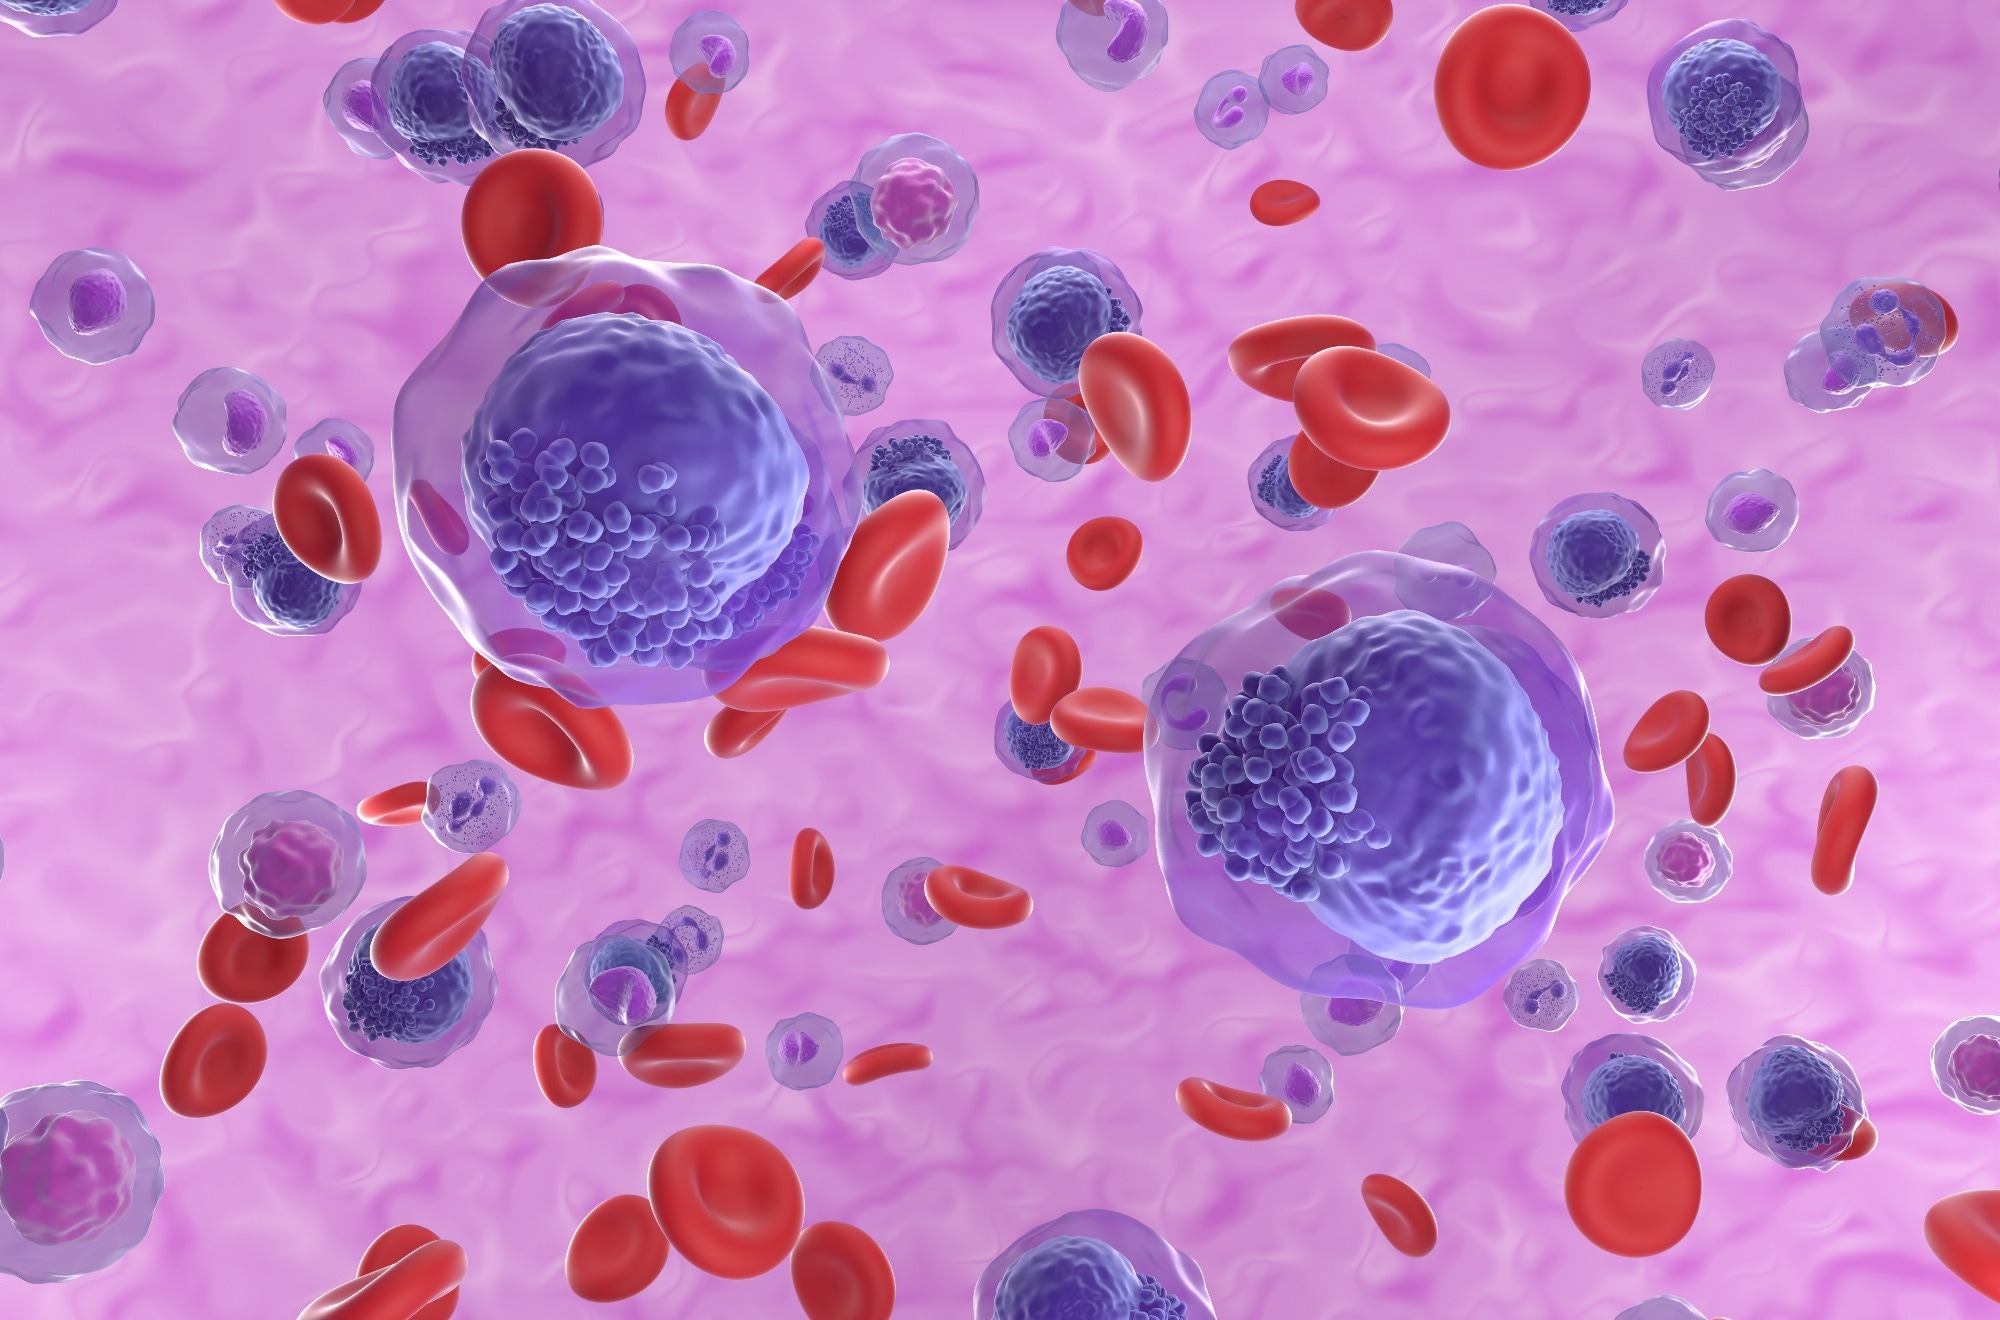 Study: Inflammatory bone marrow signaling in pediatric acute myeloid leukemia distinguishes patients with poor outcomes. Image Credit: Nemes Laszlo/Shutterstock